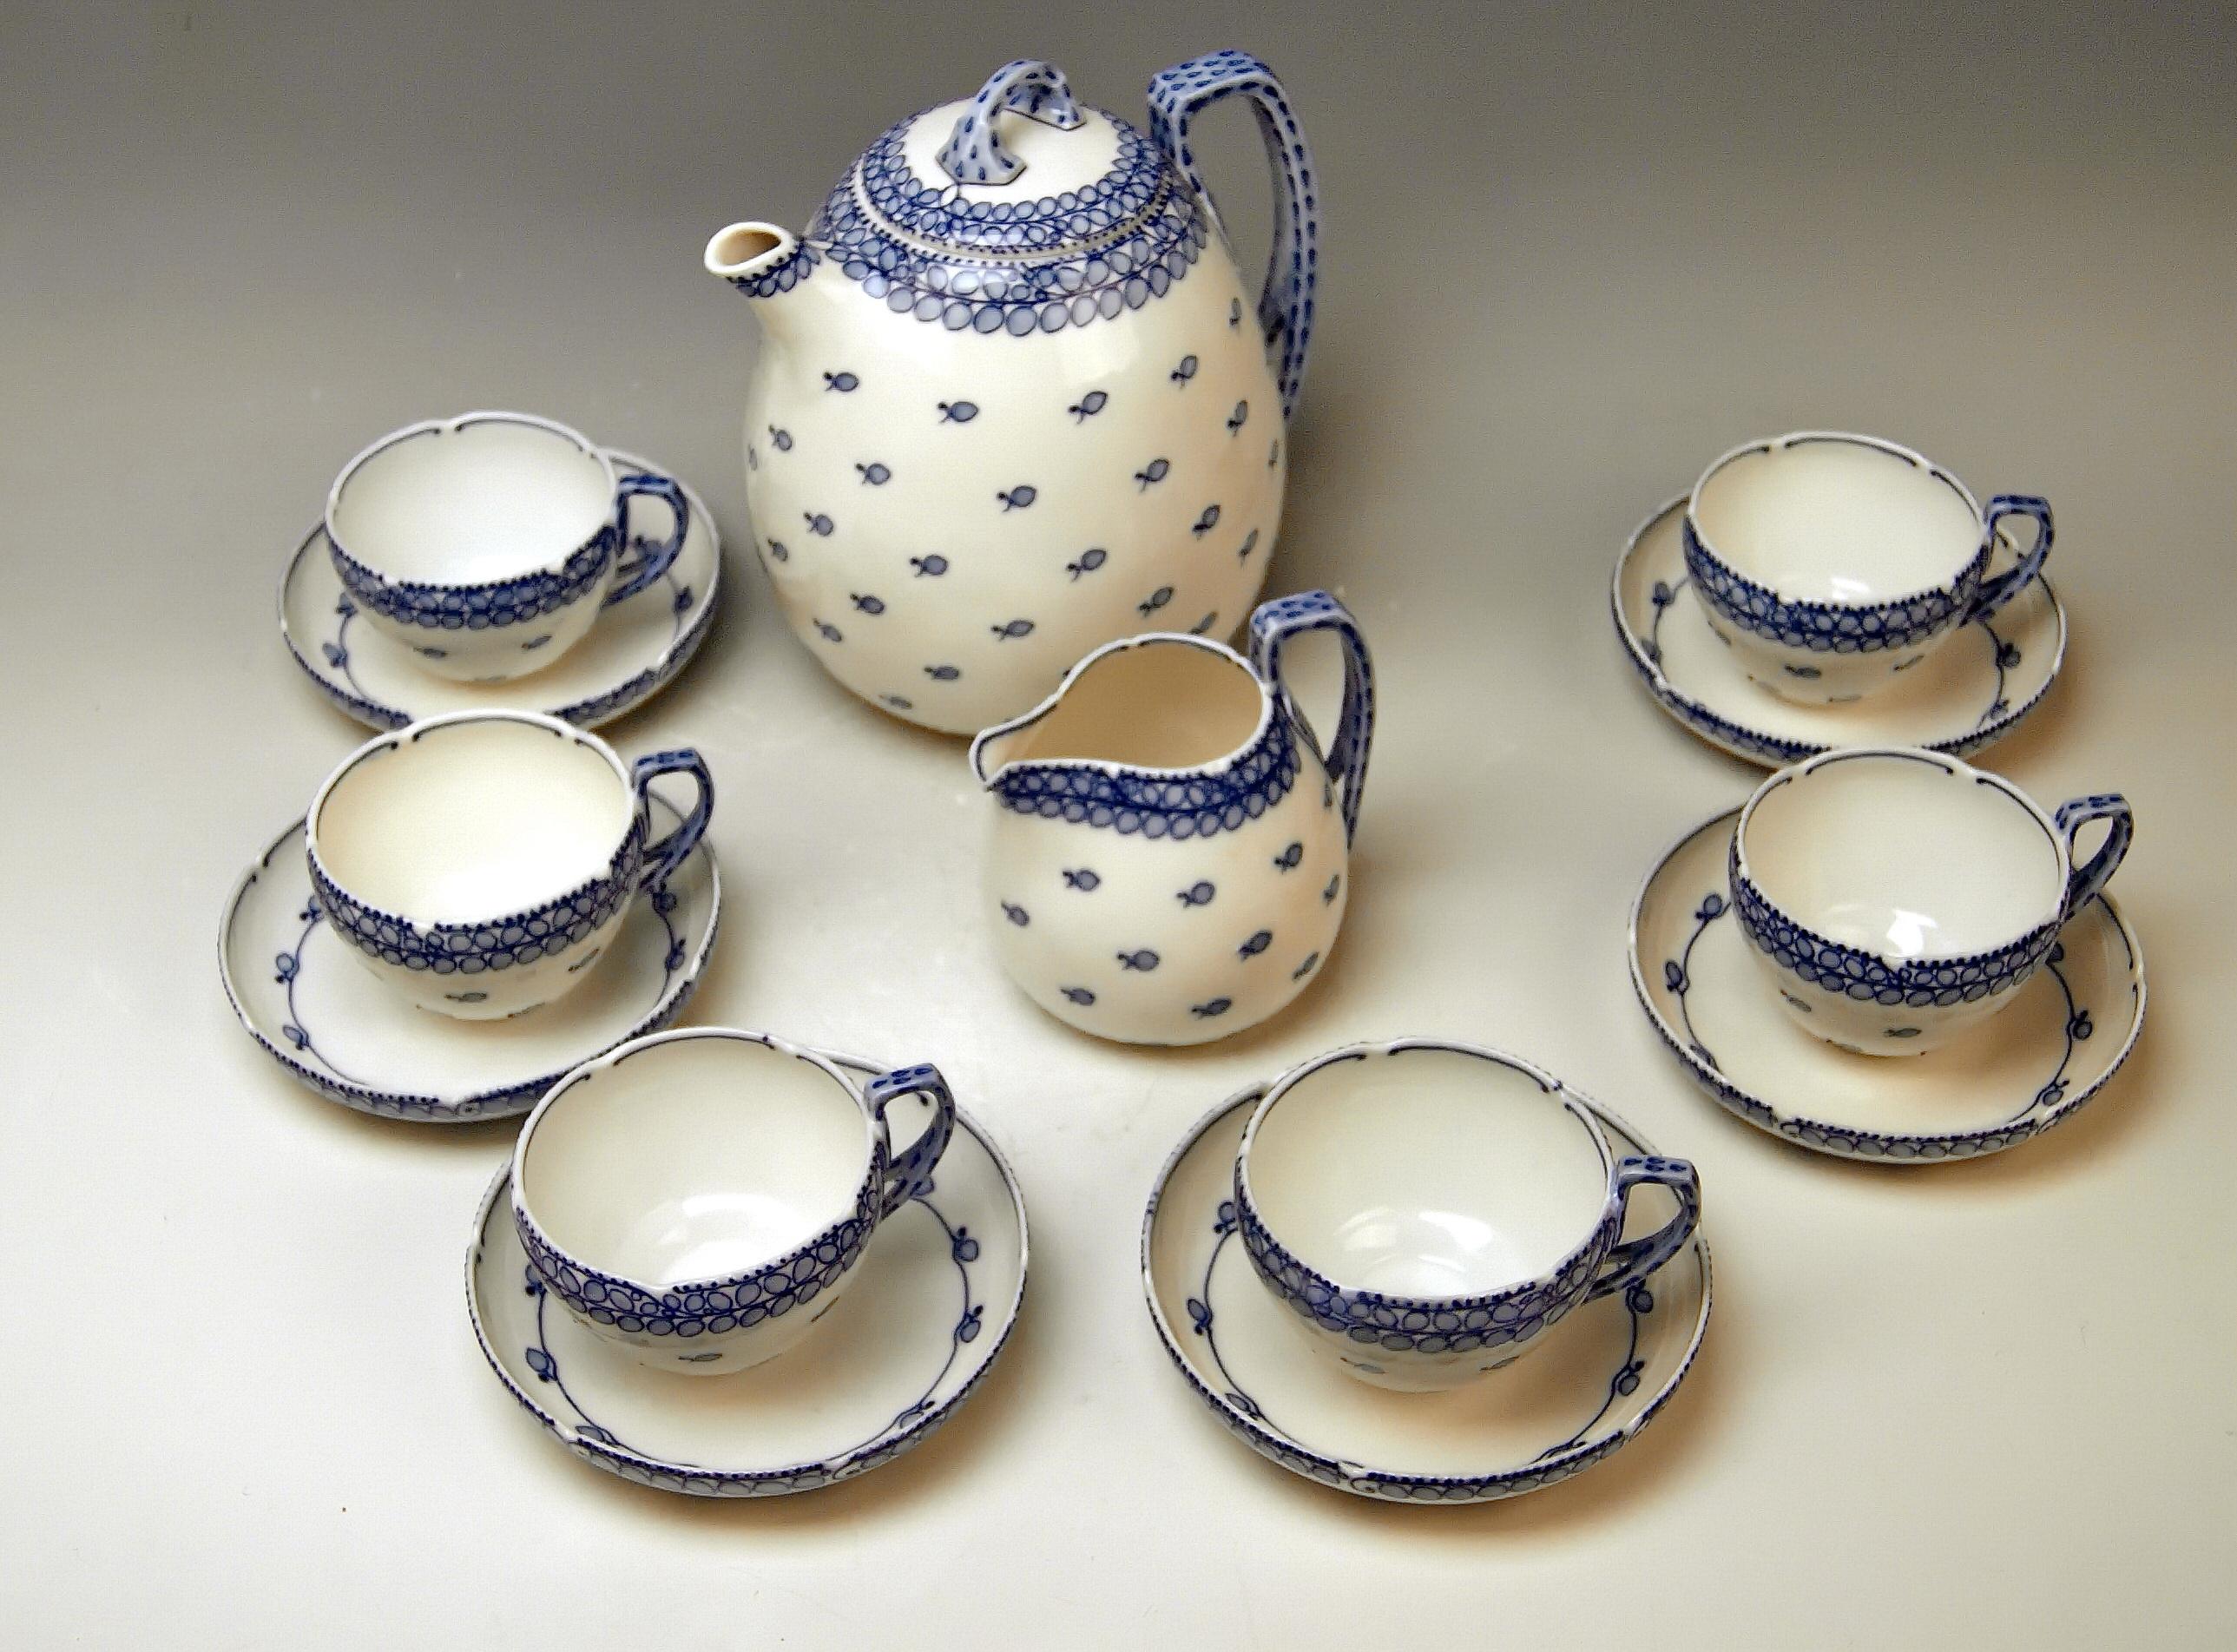 We invite you here to look at a splendid as well as rare Meissen coffee set:
White porcelain, decorated with stylized tendrils and leaves = cobalt blue shaded / underglazed. 
DECOR SO-SAID 